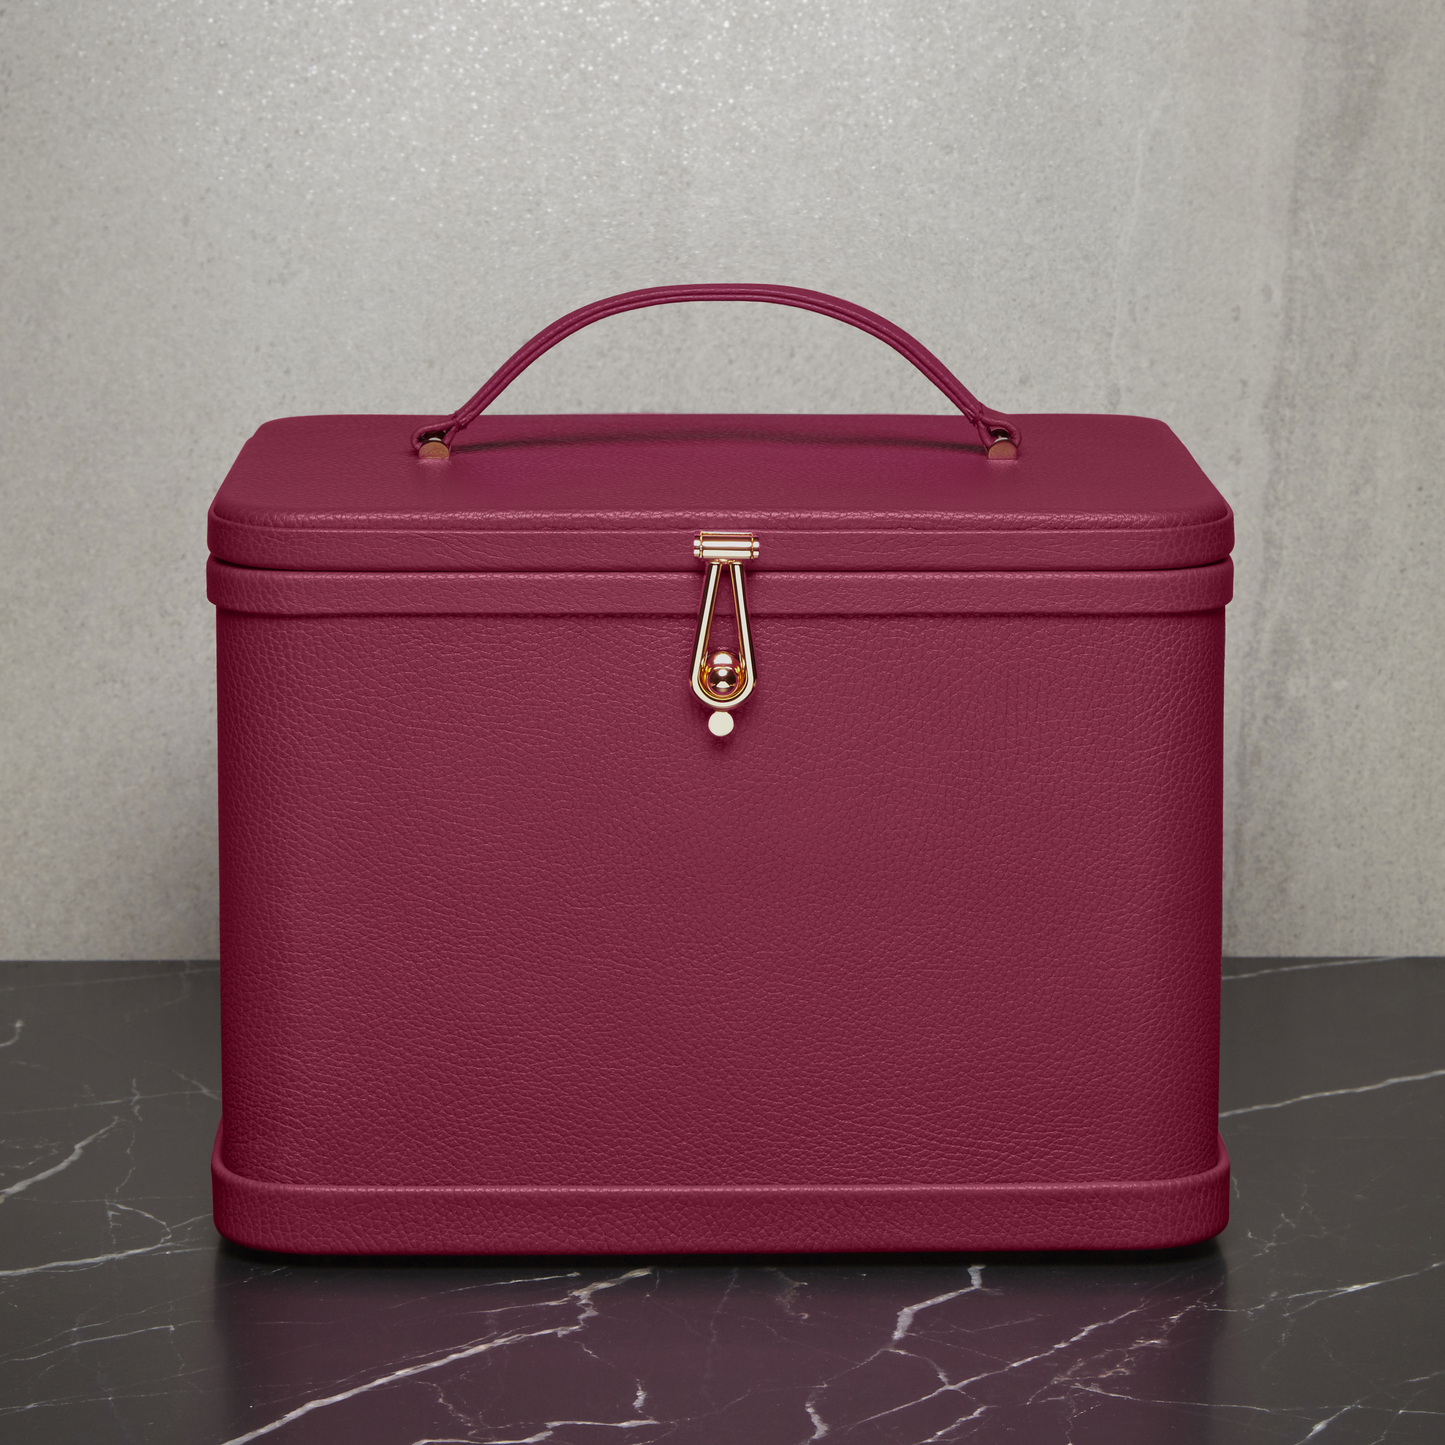 Atelier Verdi large pink leather vanity case, front view